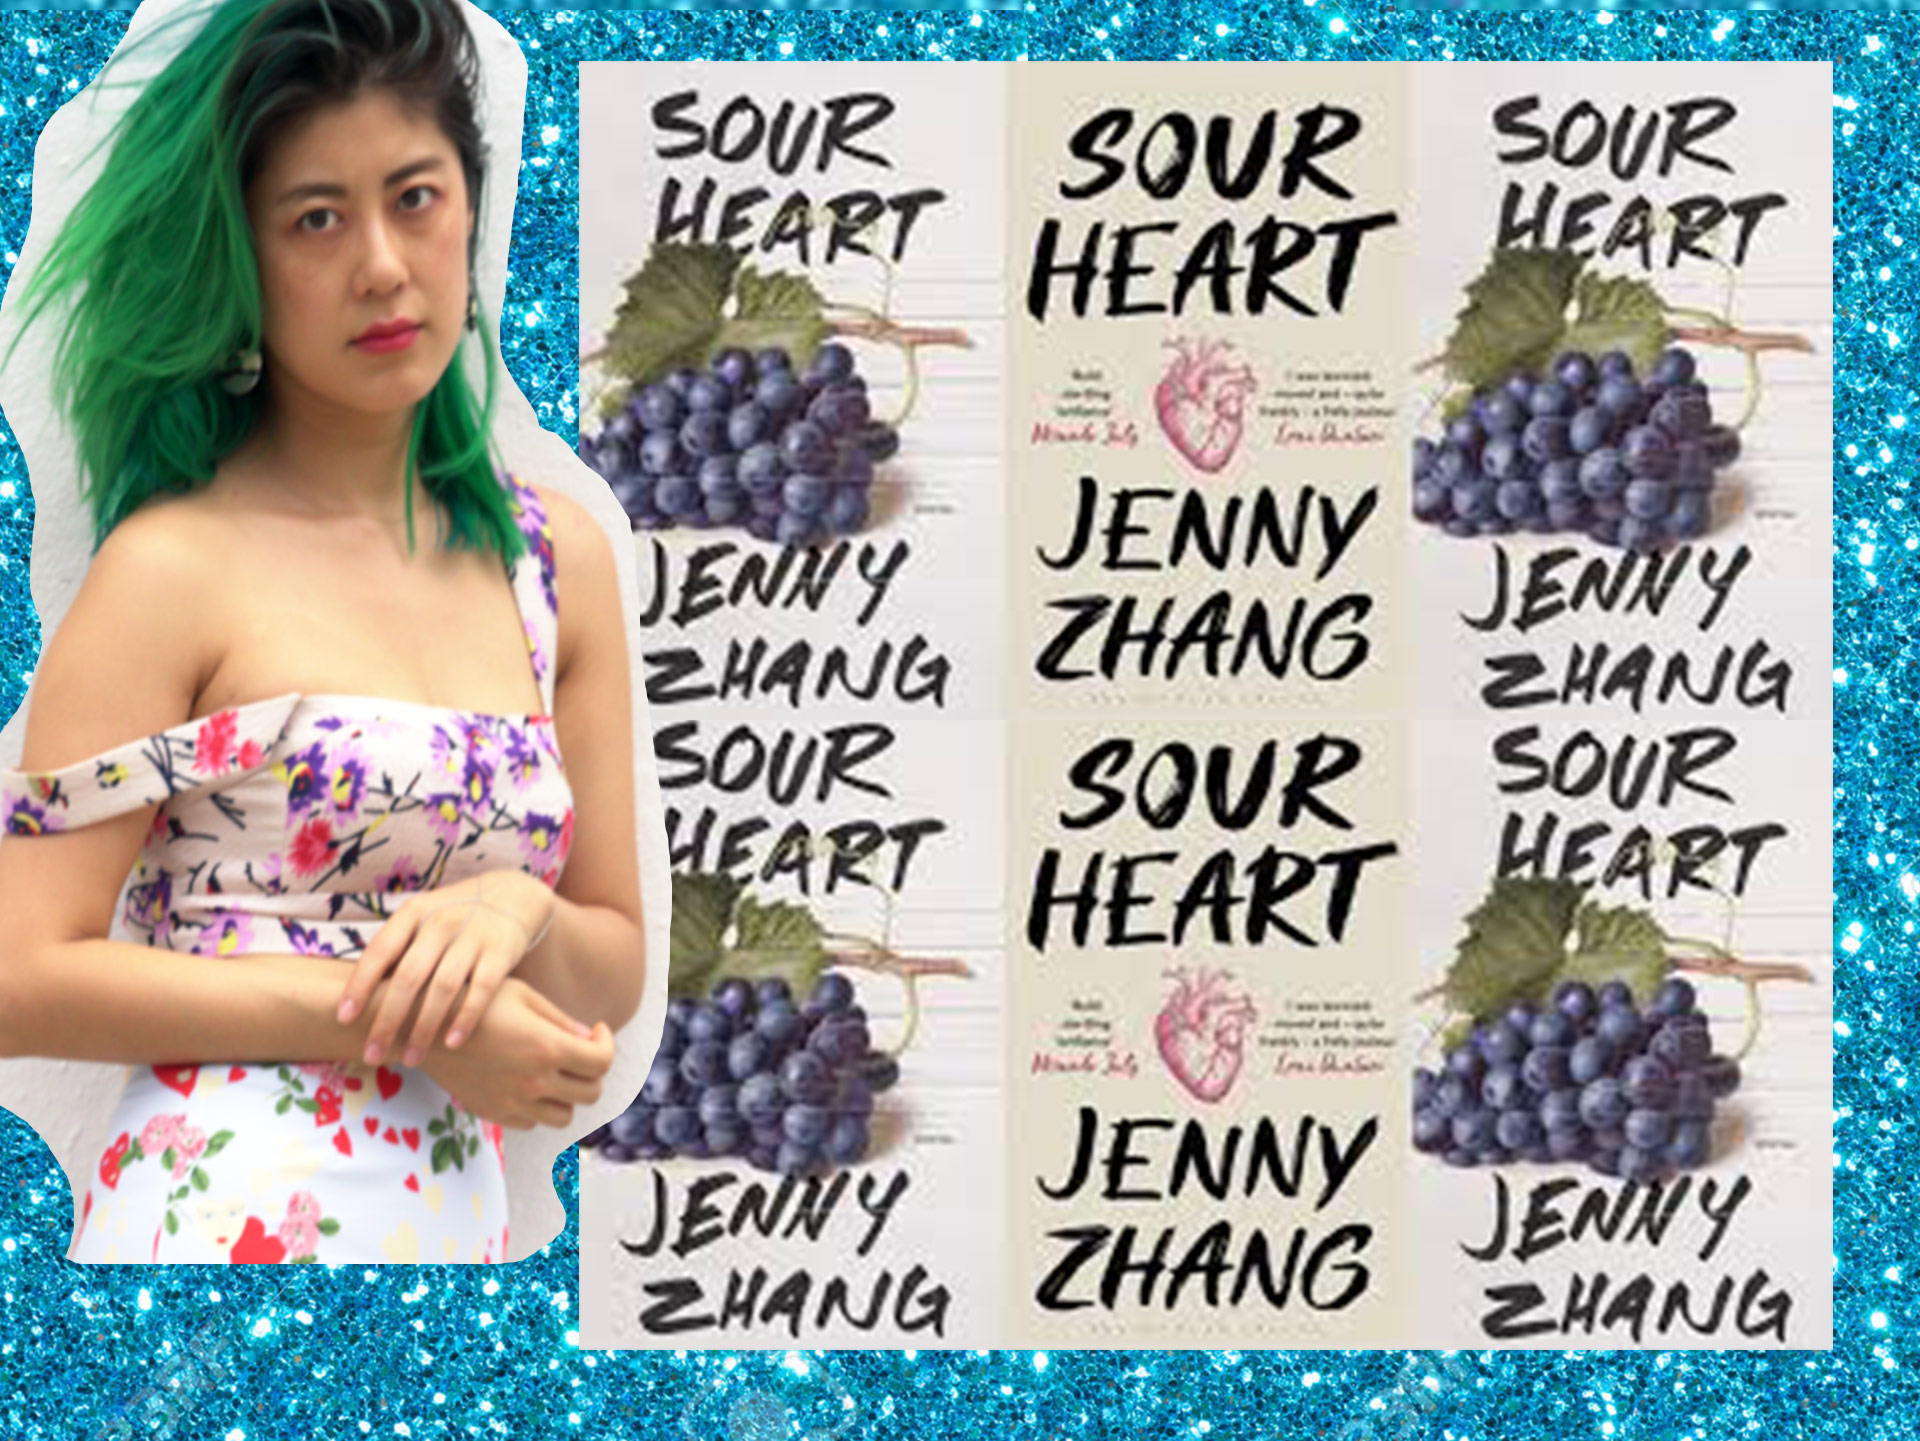 Now to Read Book Club September read: Sour Heart by Jenny Zhang